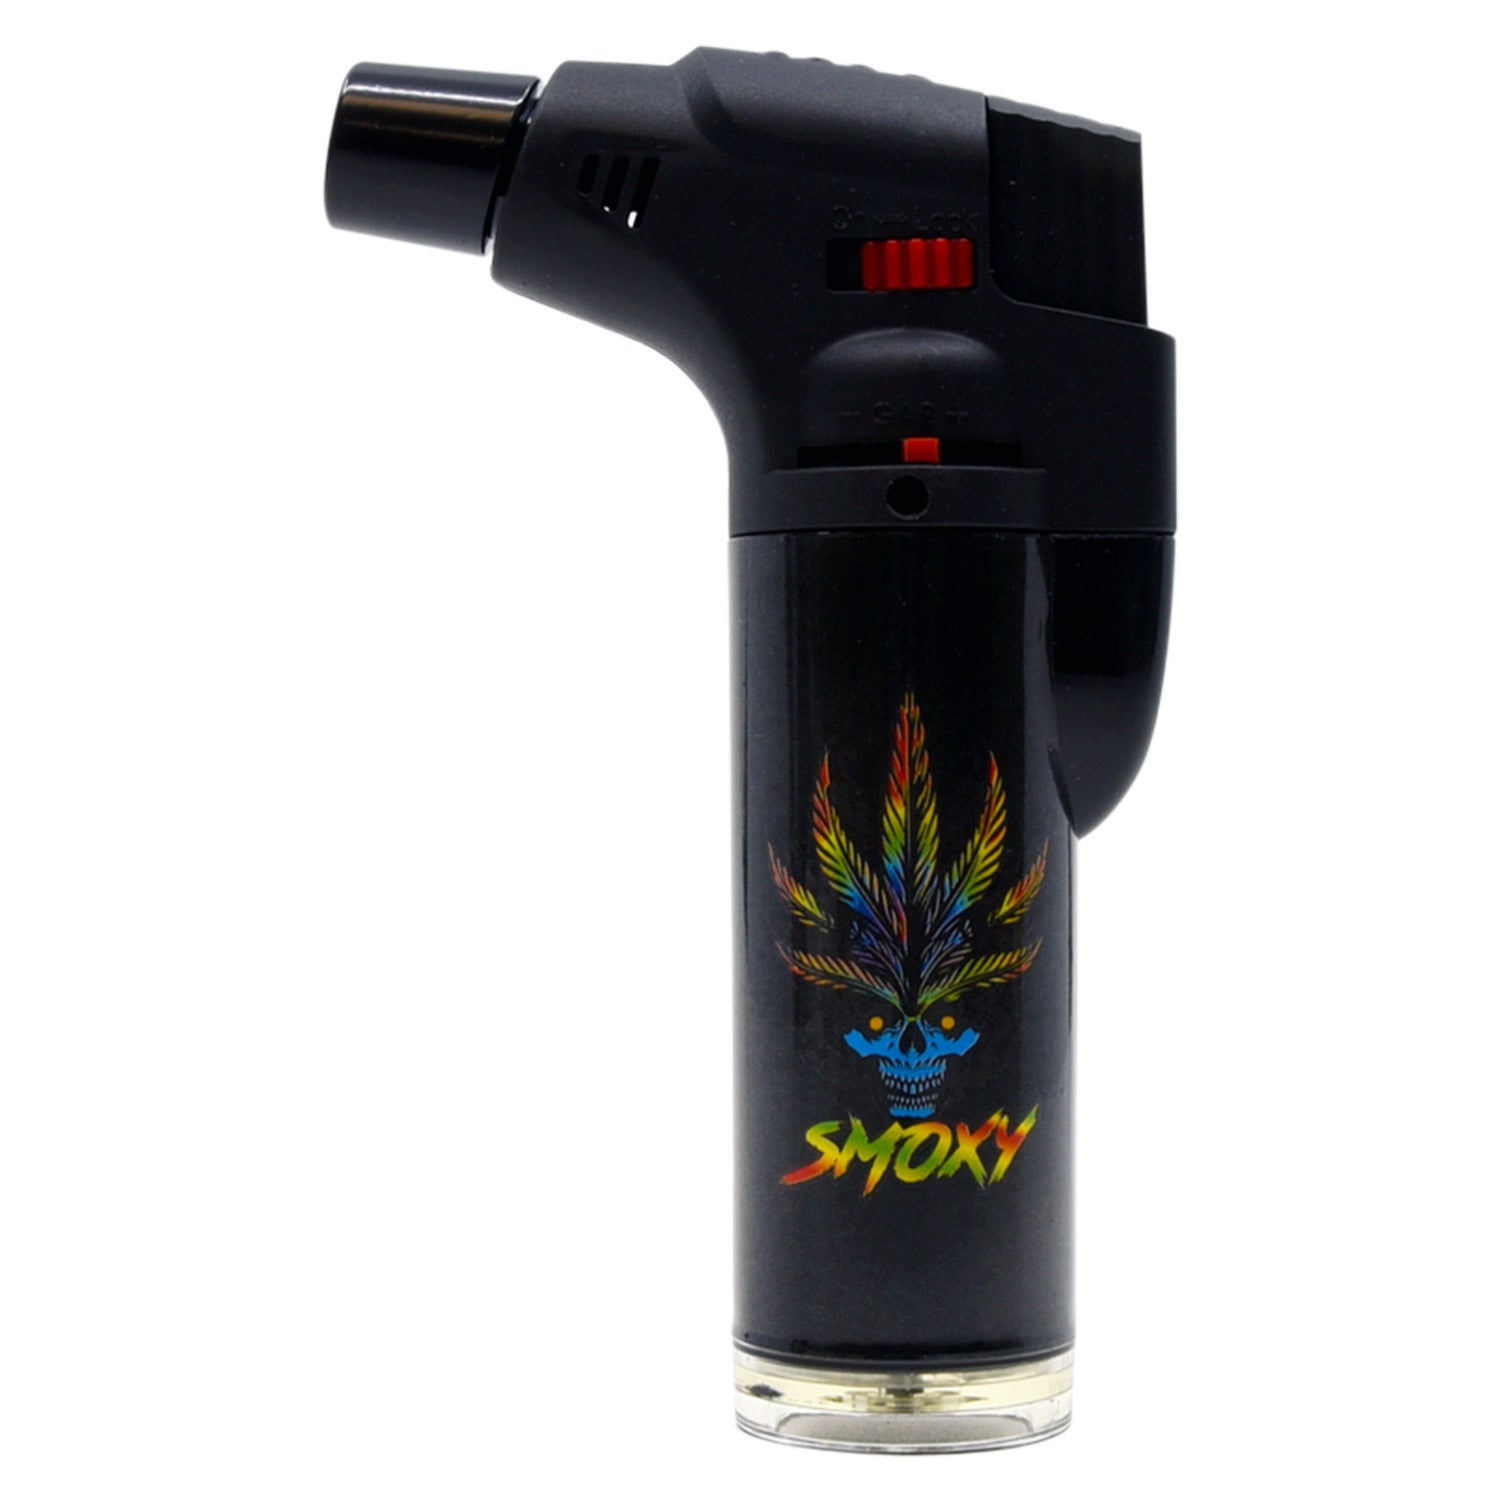 Smoxy Torch Lighter Classic